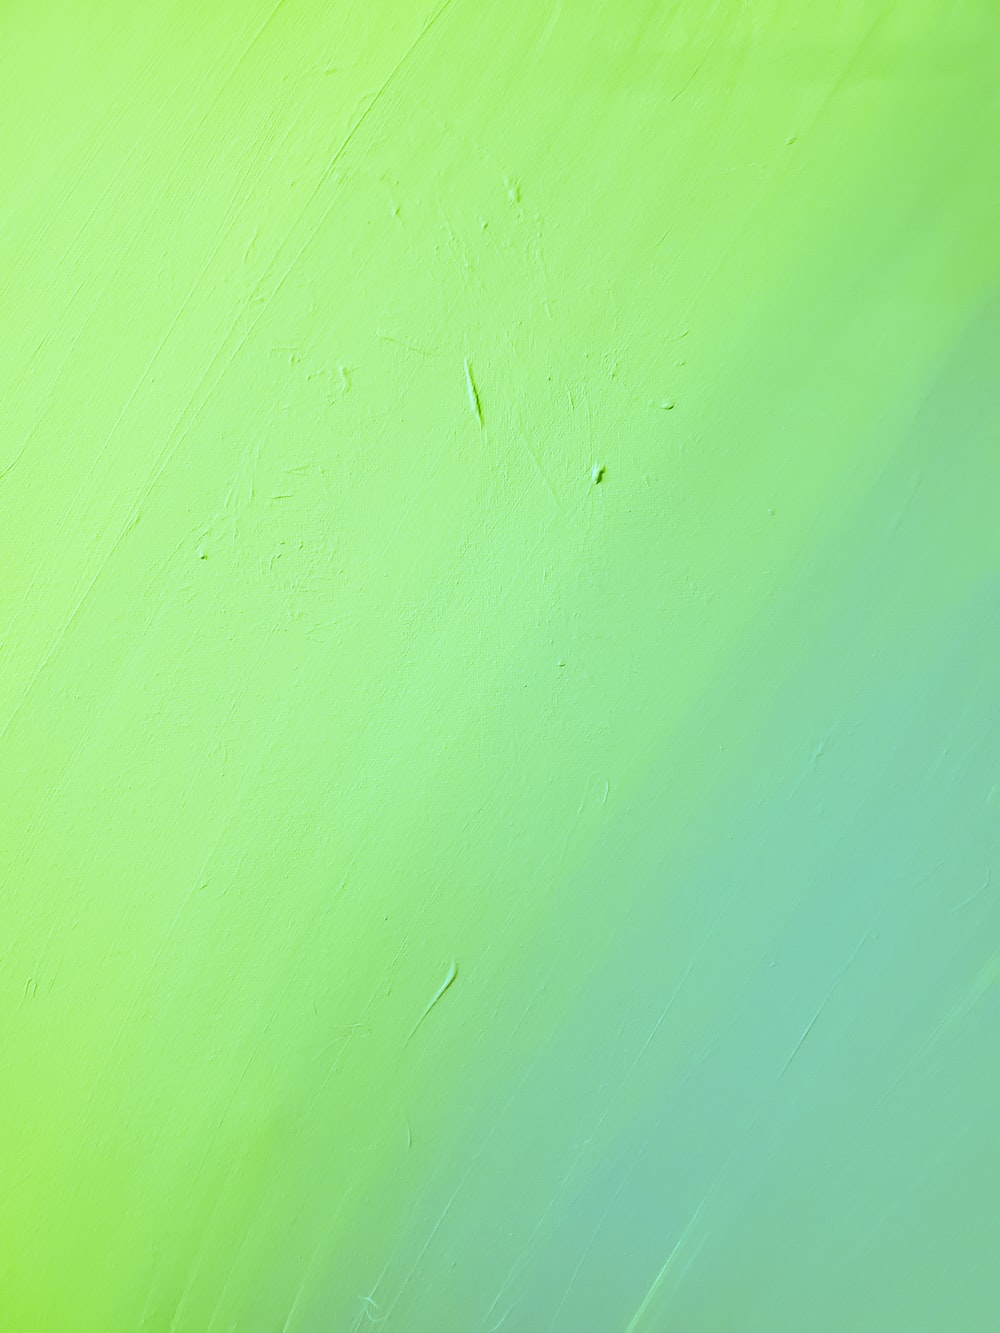 Bright Green Picture. Download Free Image